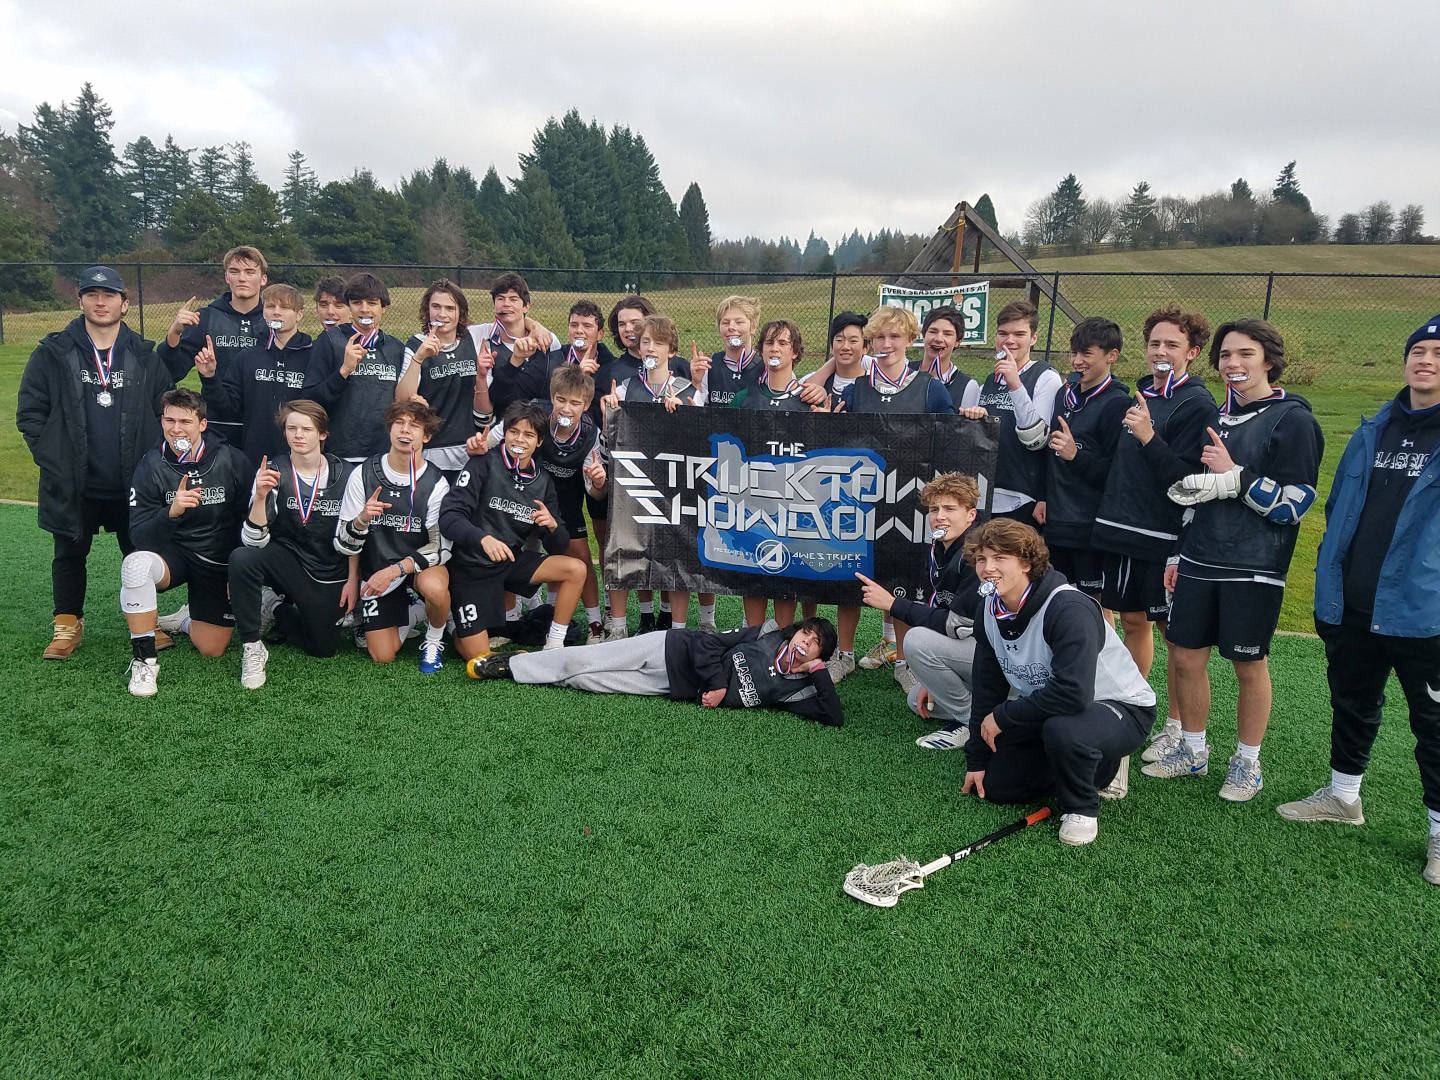 The Classics 2020/2021 and 2022/2023 teams both won first-place medals in the Elite A and Elite B divisions at the Strucktown Showdown tournament on Dec. 15 in Oregon. Courtesy photo